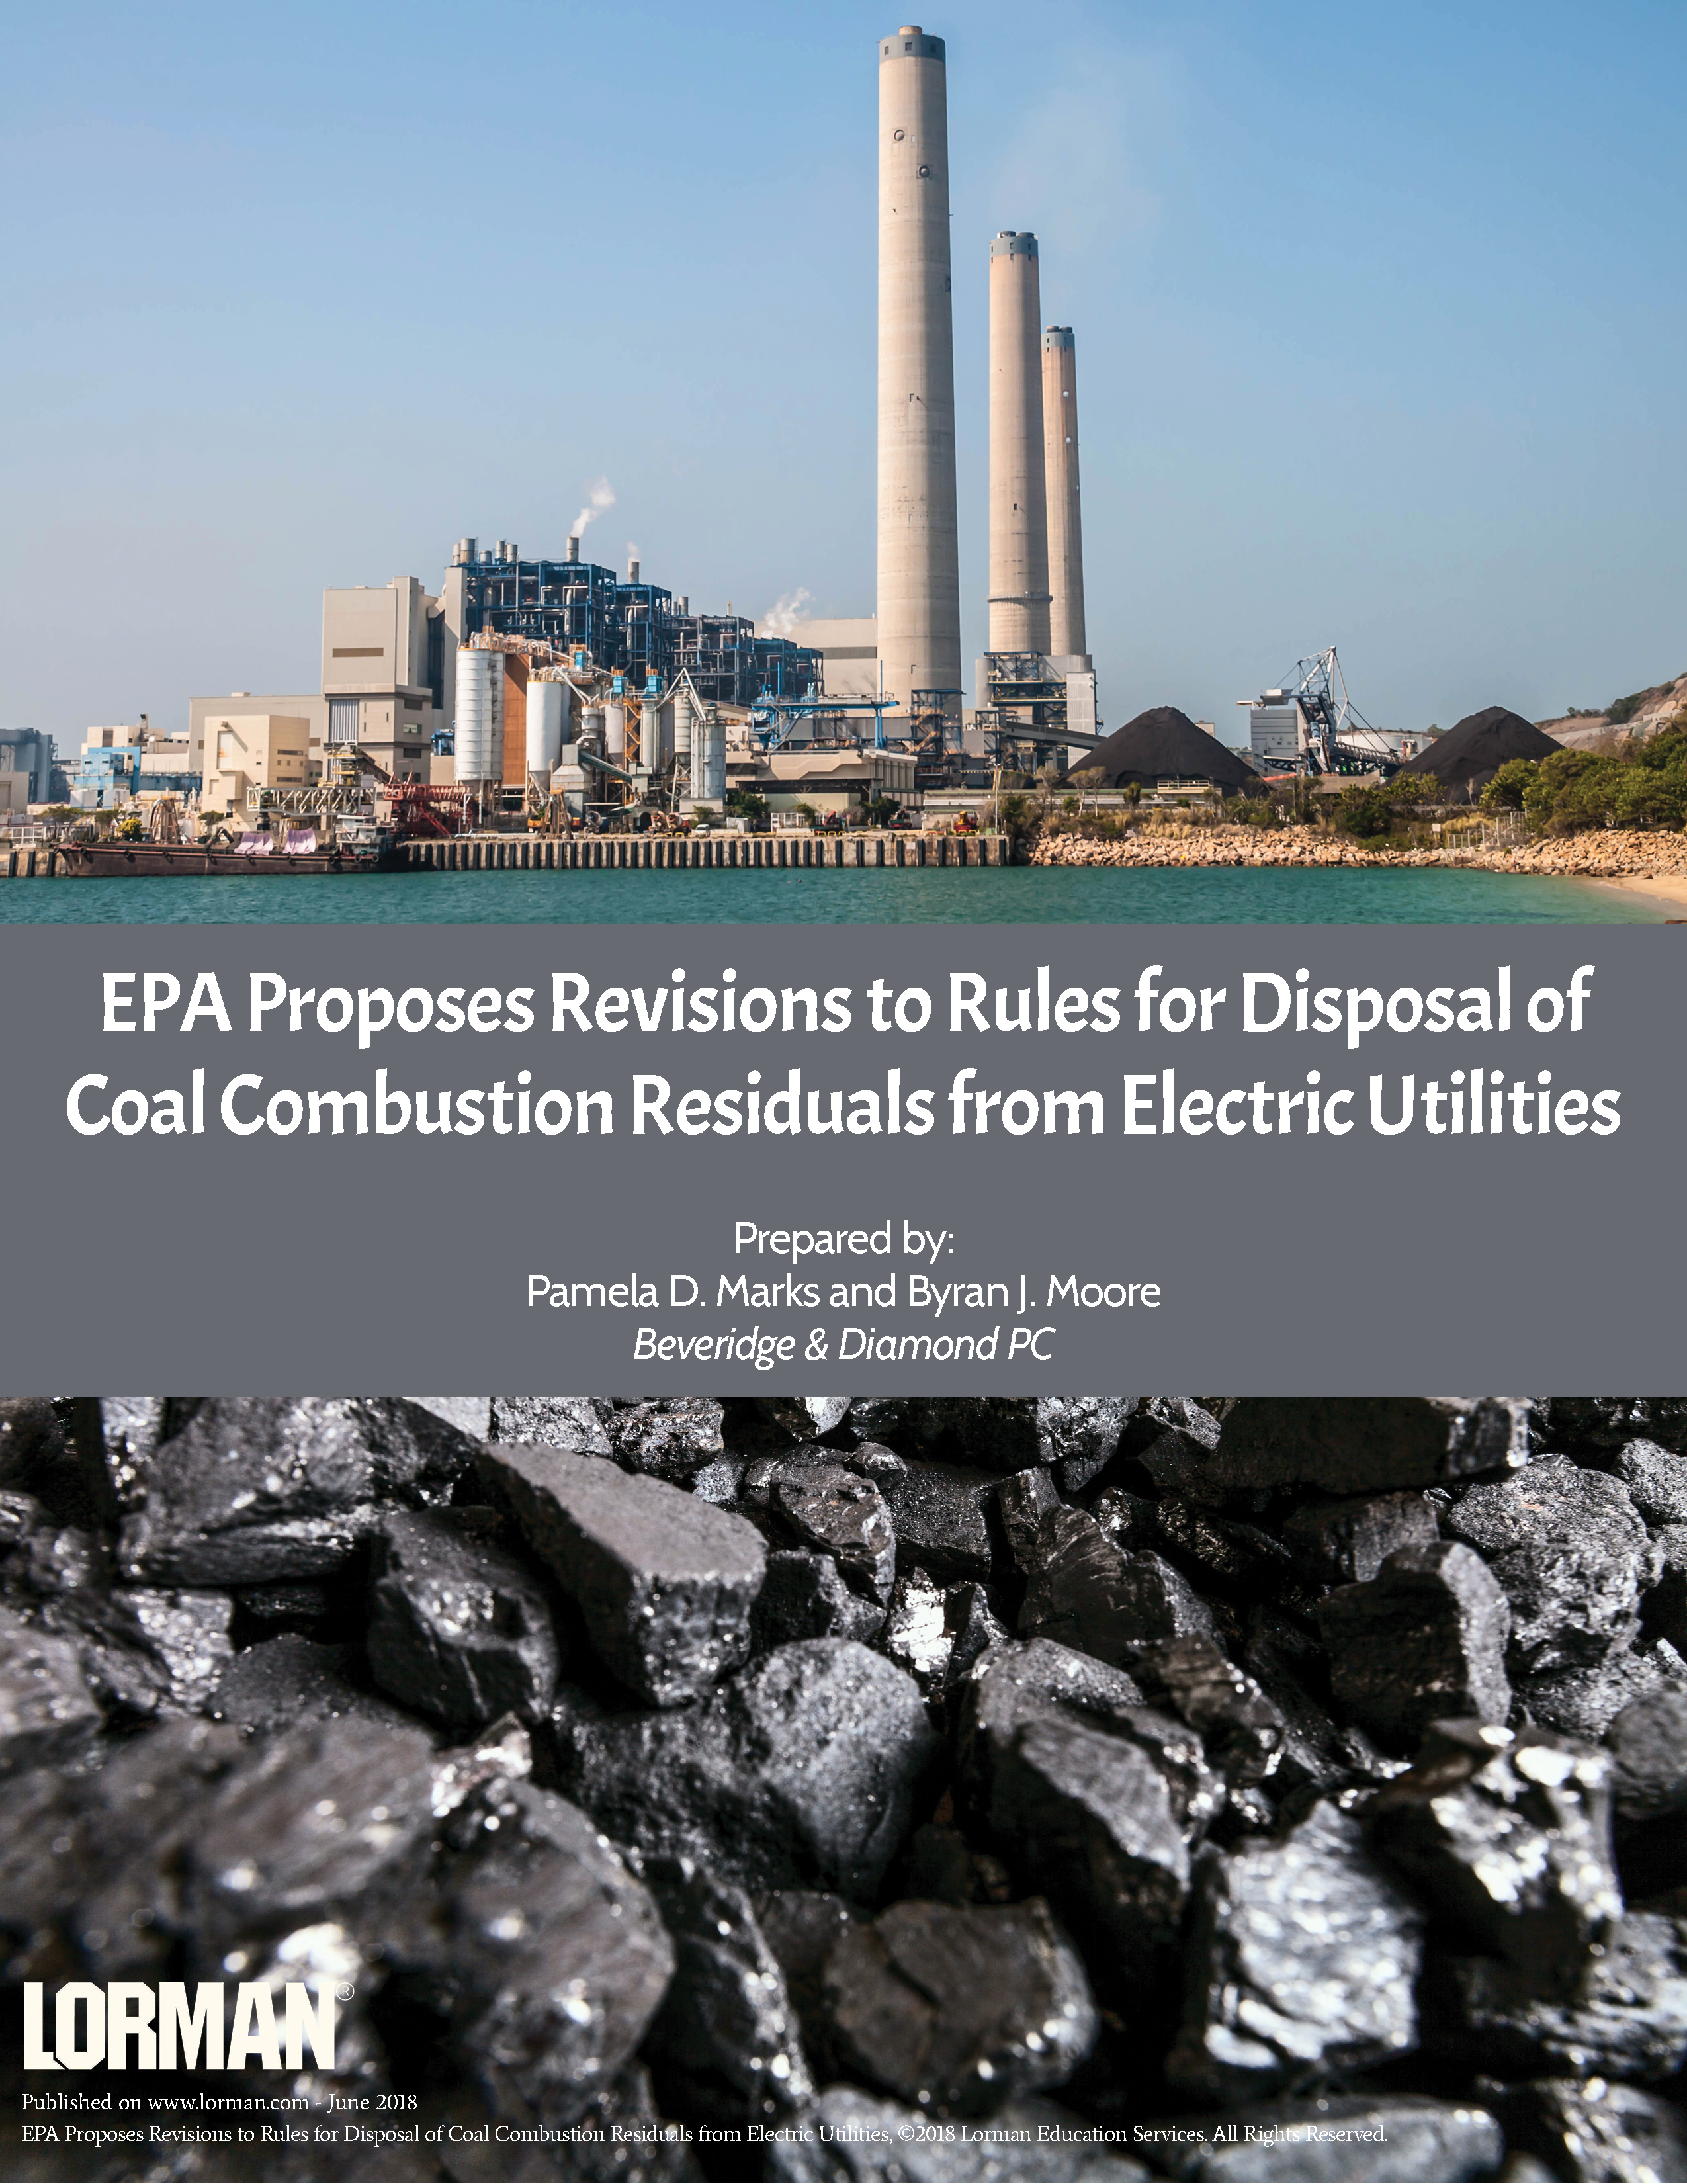 EPA Proposes Revisions to Rules for Disposal of Coal Combustion Residuals from Electric Utilities